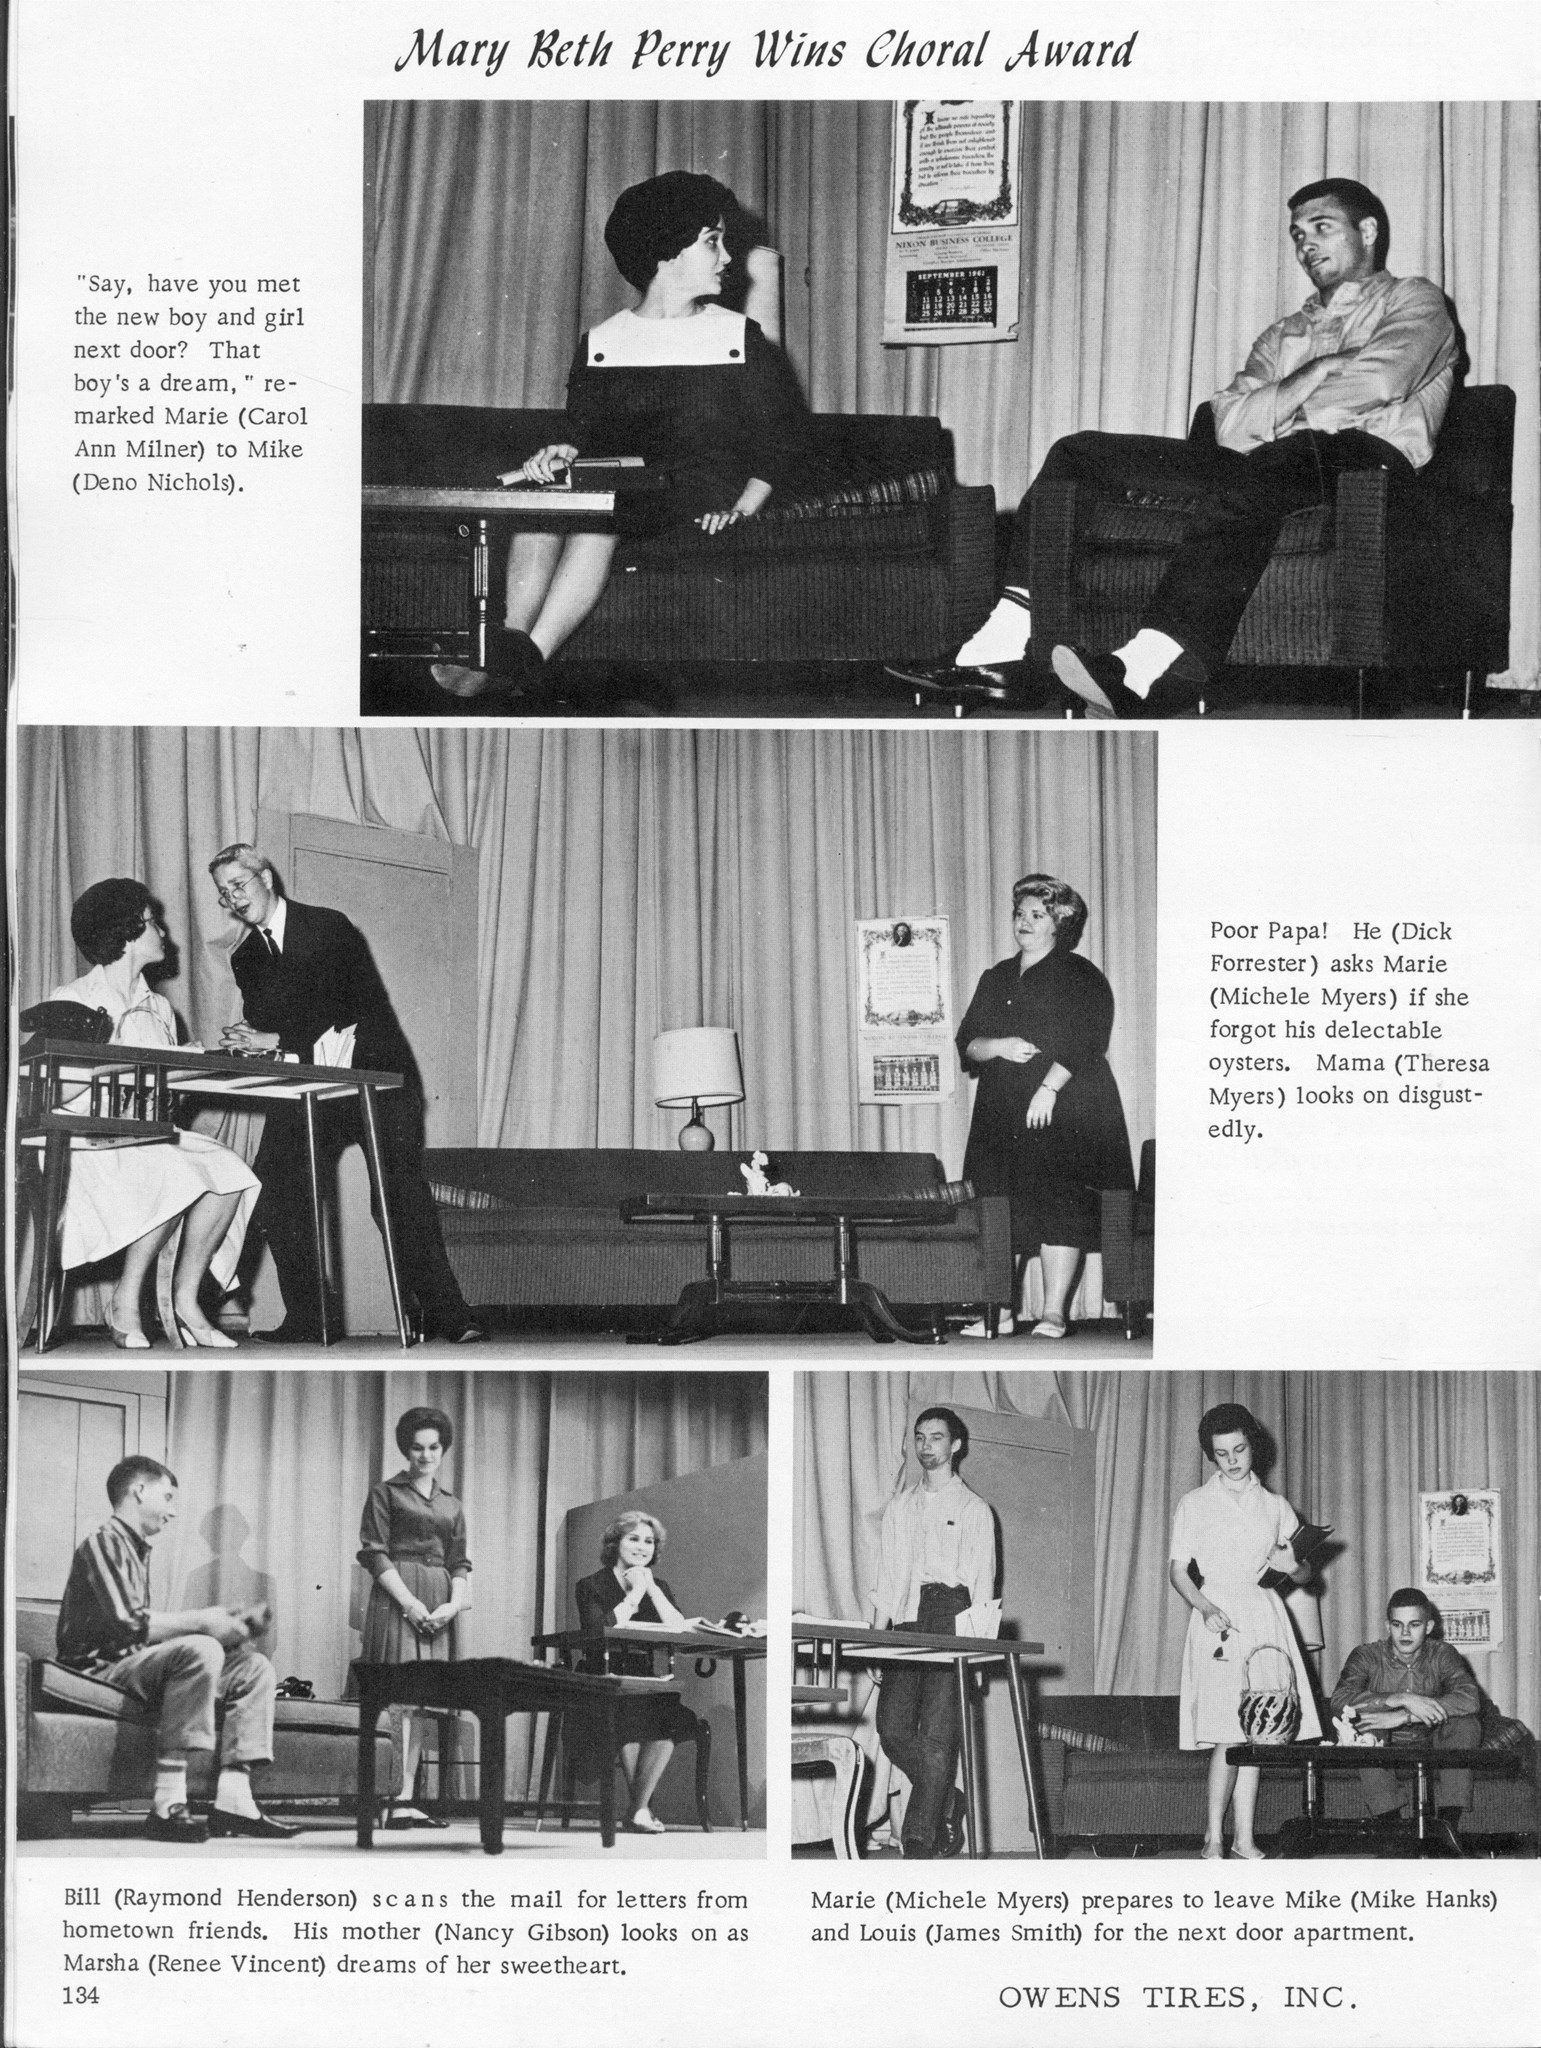 ../../../Images/Large/1962/Arclight-1962-pg0134.jpg